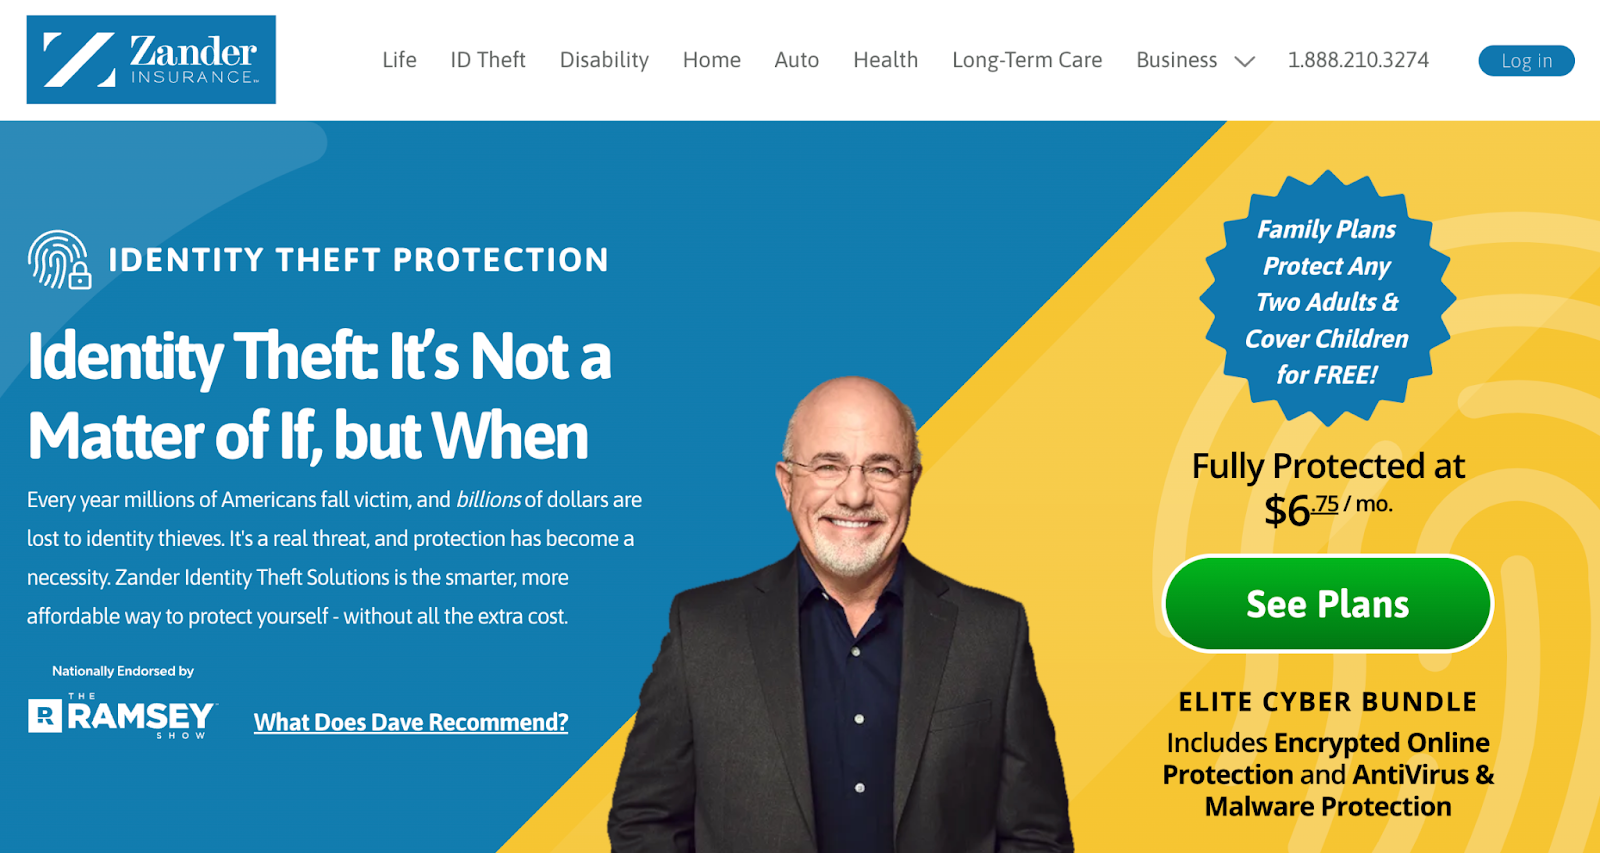 Who does Dave Ramsey recommend for identity theft protection?
